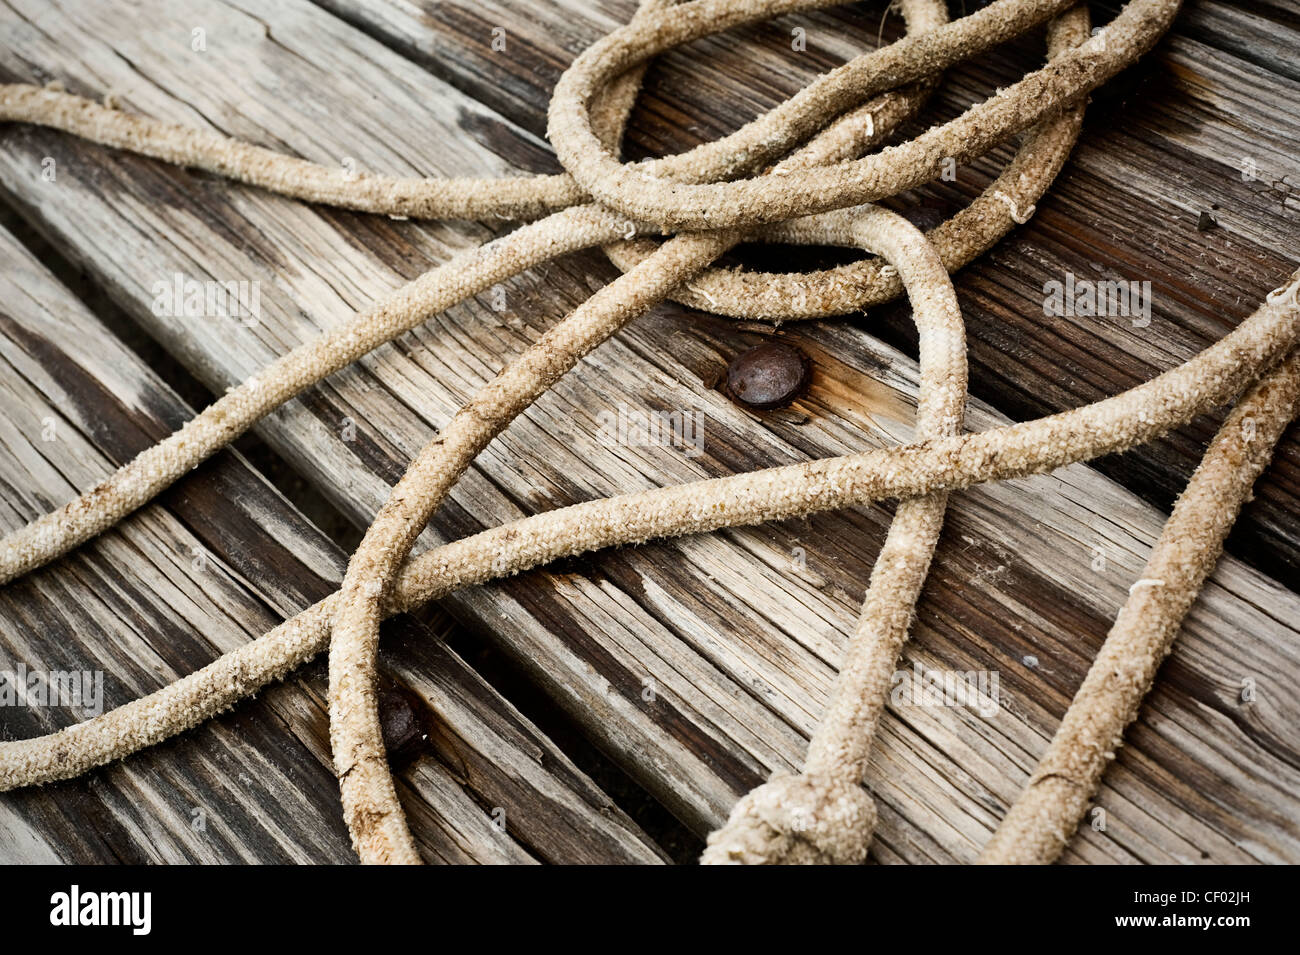 old wooden boards and rusty nails with rope on Stock Photo